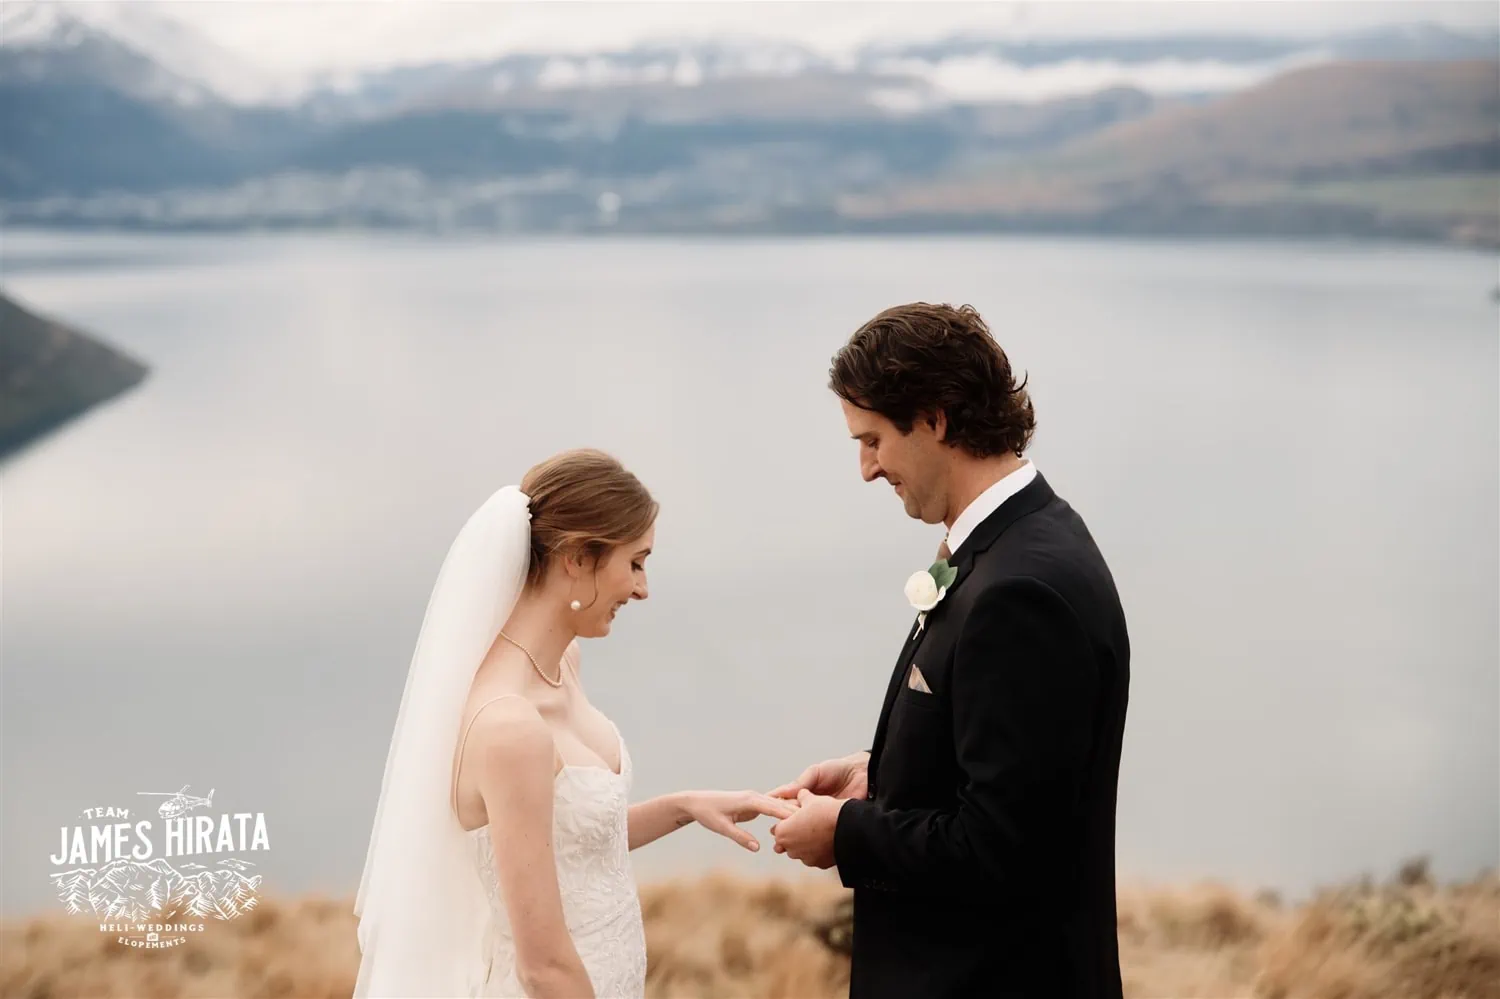 Hannah and Ross, an elopement wedding couple, exchange wedding rings on a hill overlooking Lake Wanaka in Queenstown, New Zealand.